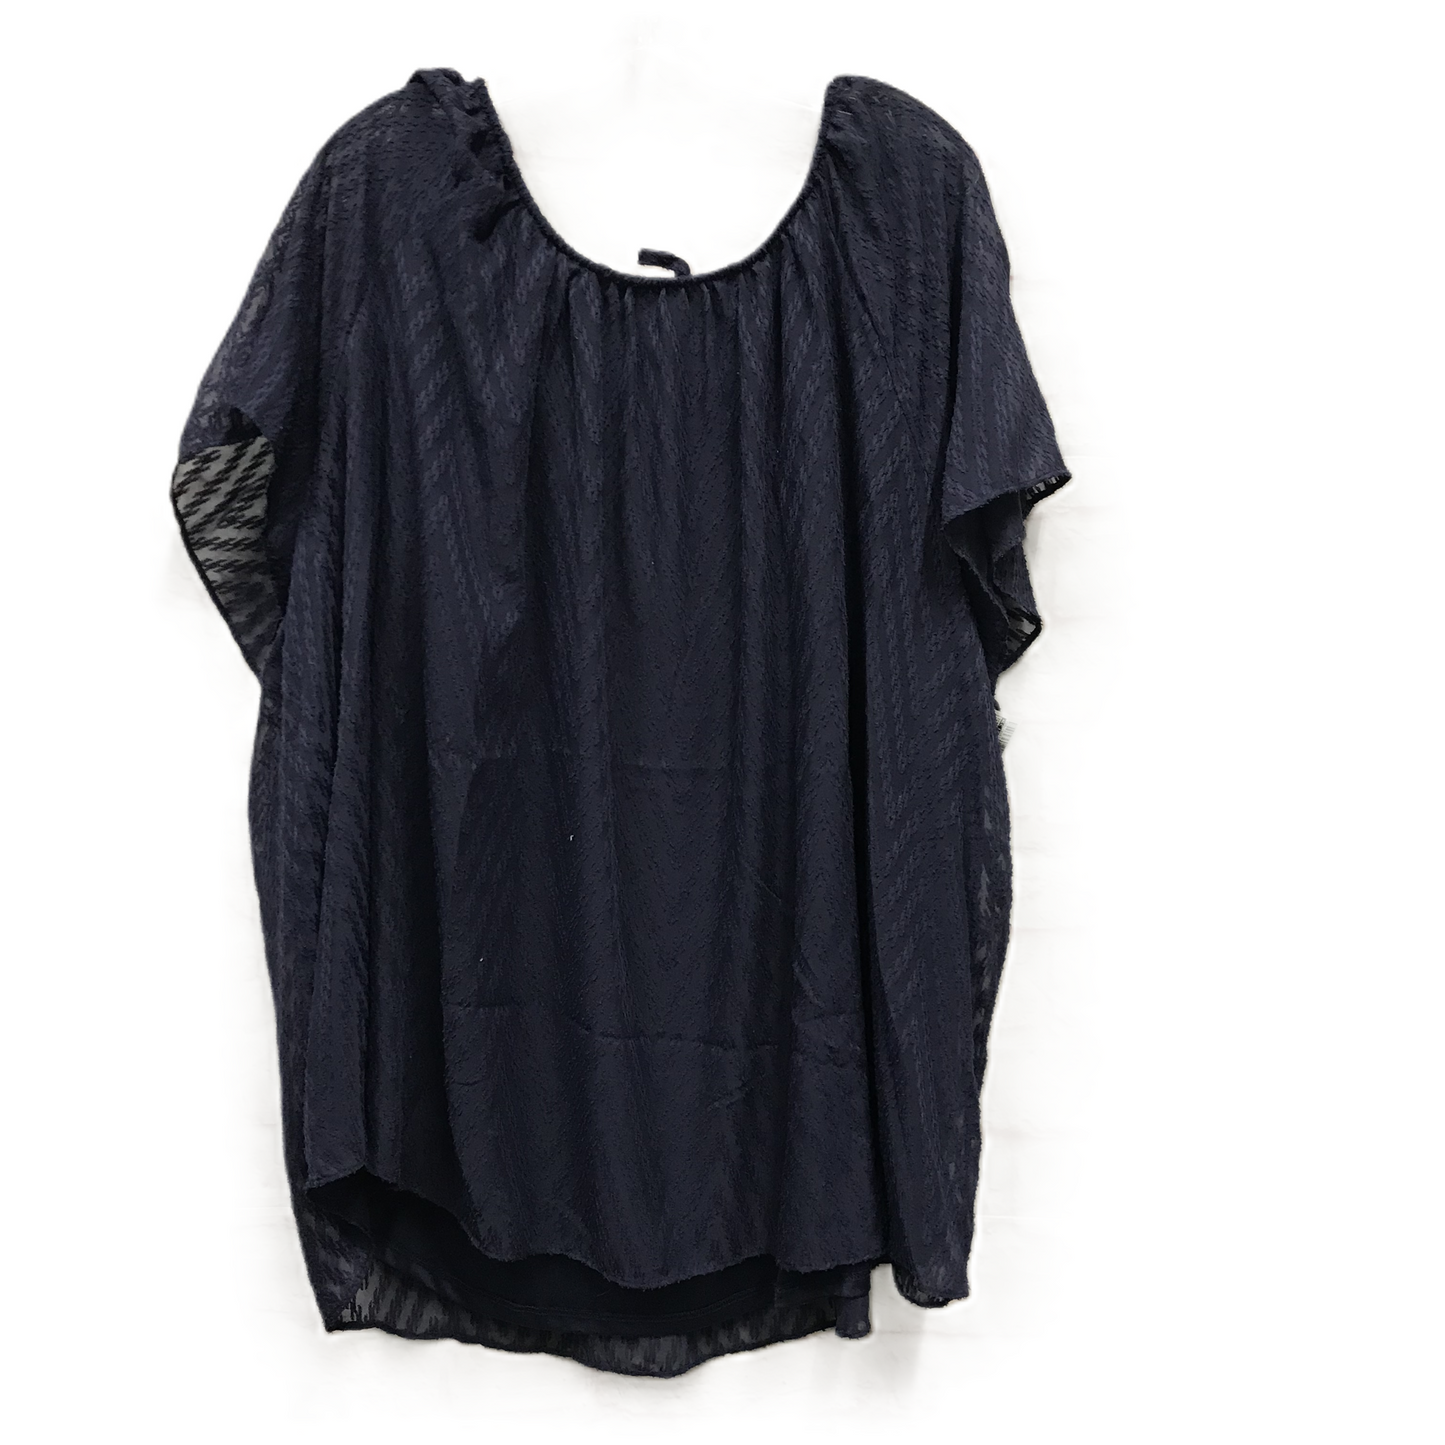 Blue Top Short Sleeve By Lc Lauren Conrad, Size: 4x